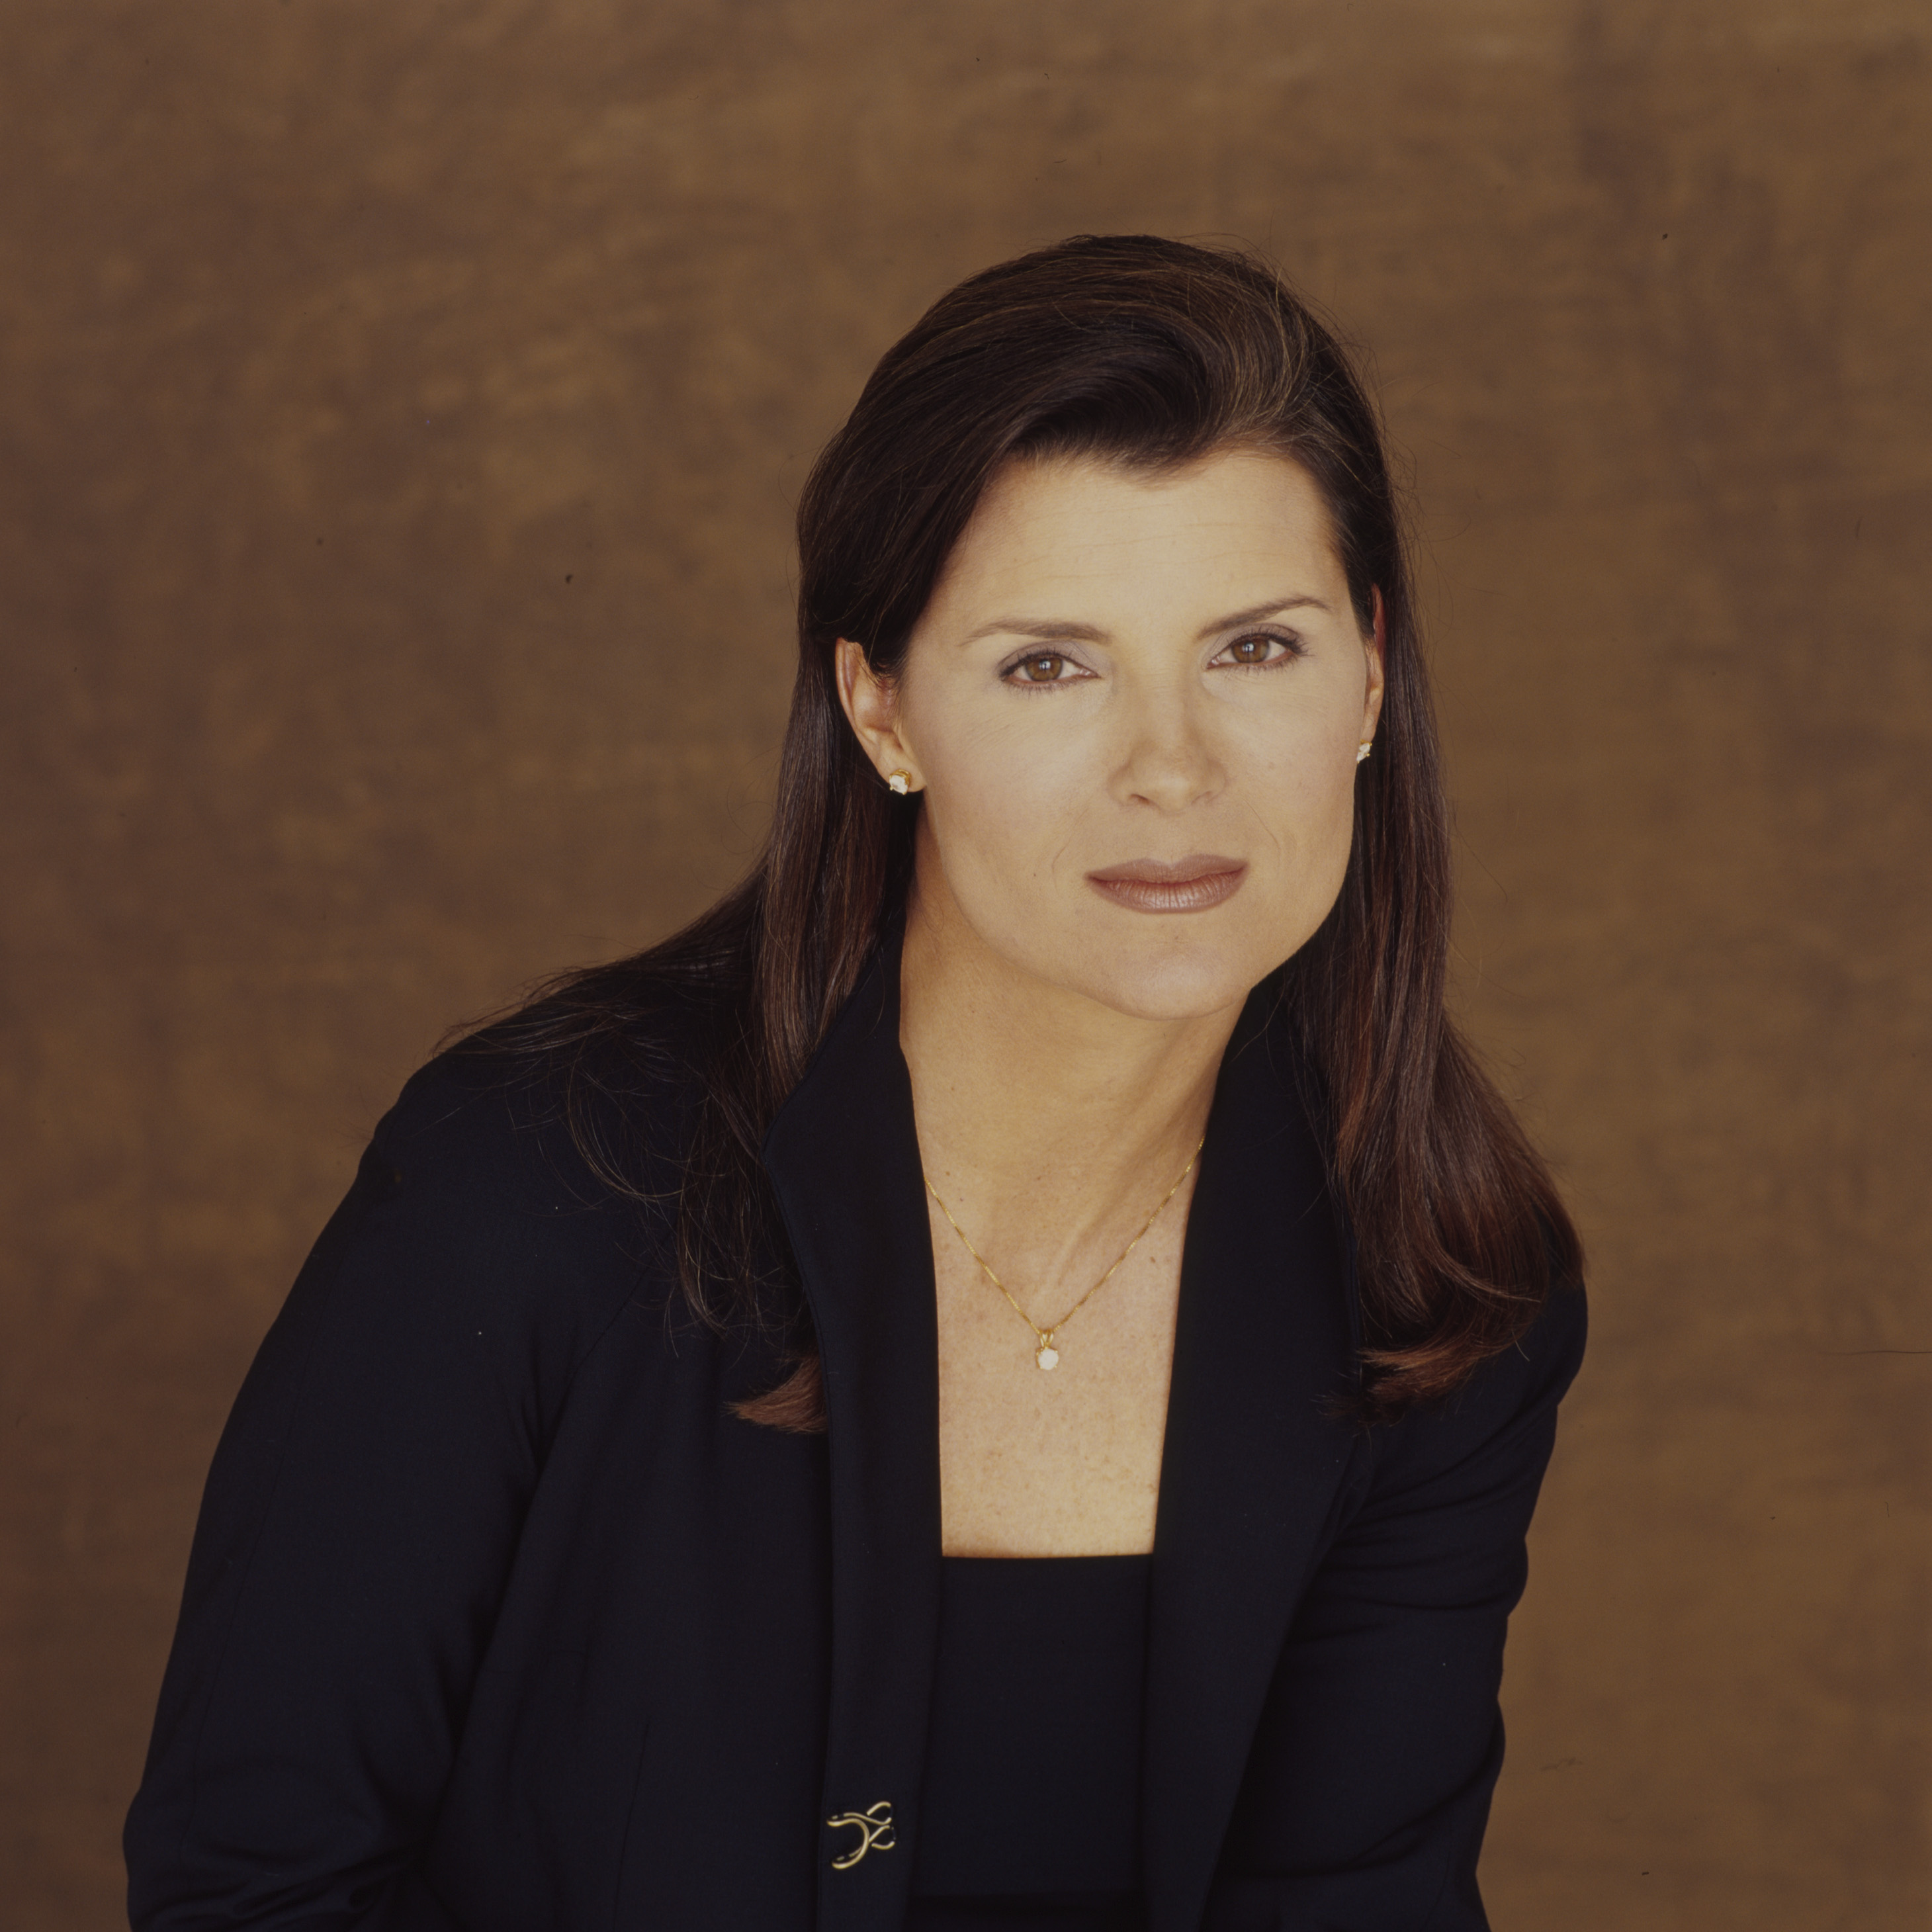 'The Bold and the Beautiful' actor Kimberlin Brown in black suit and standing in front of brown backdrop.